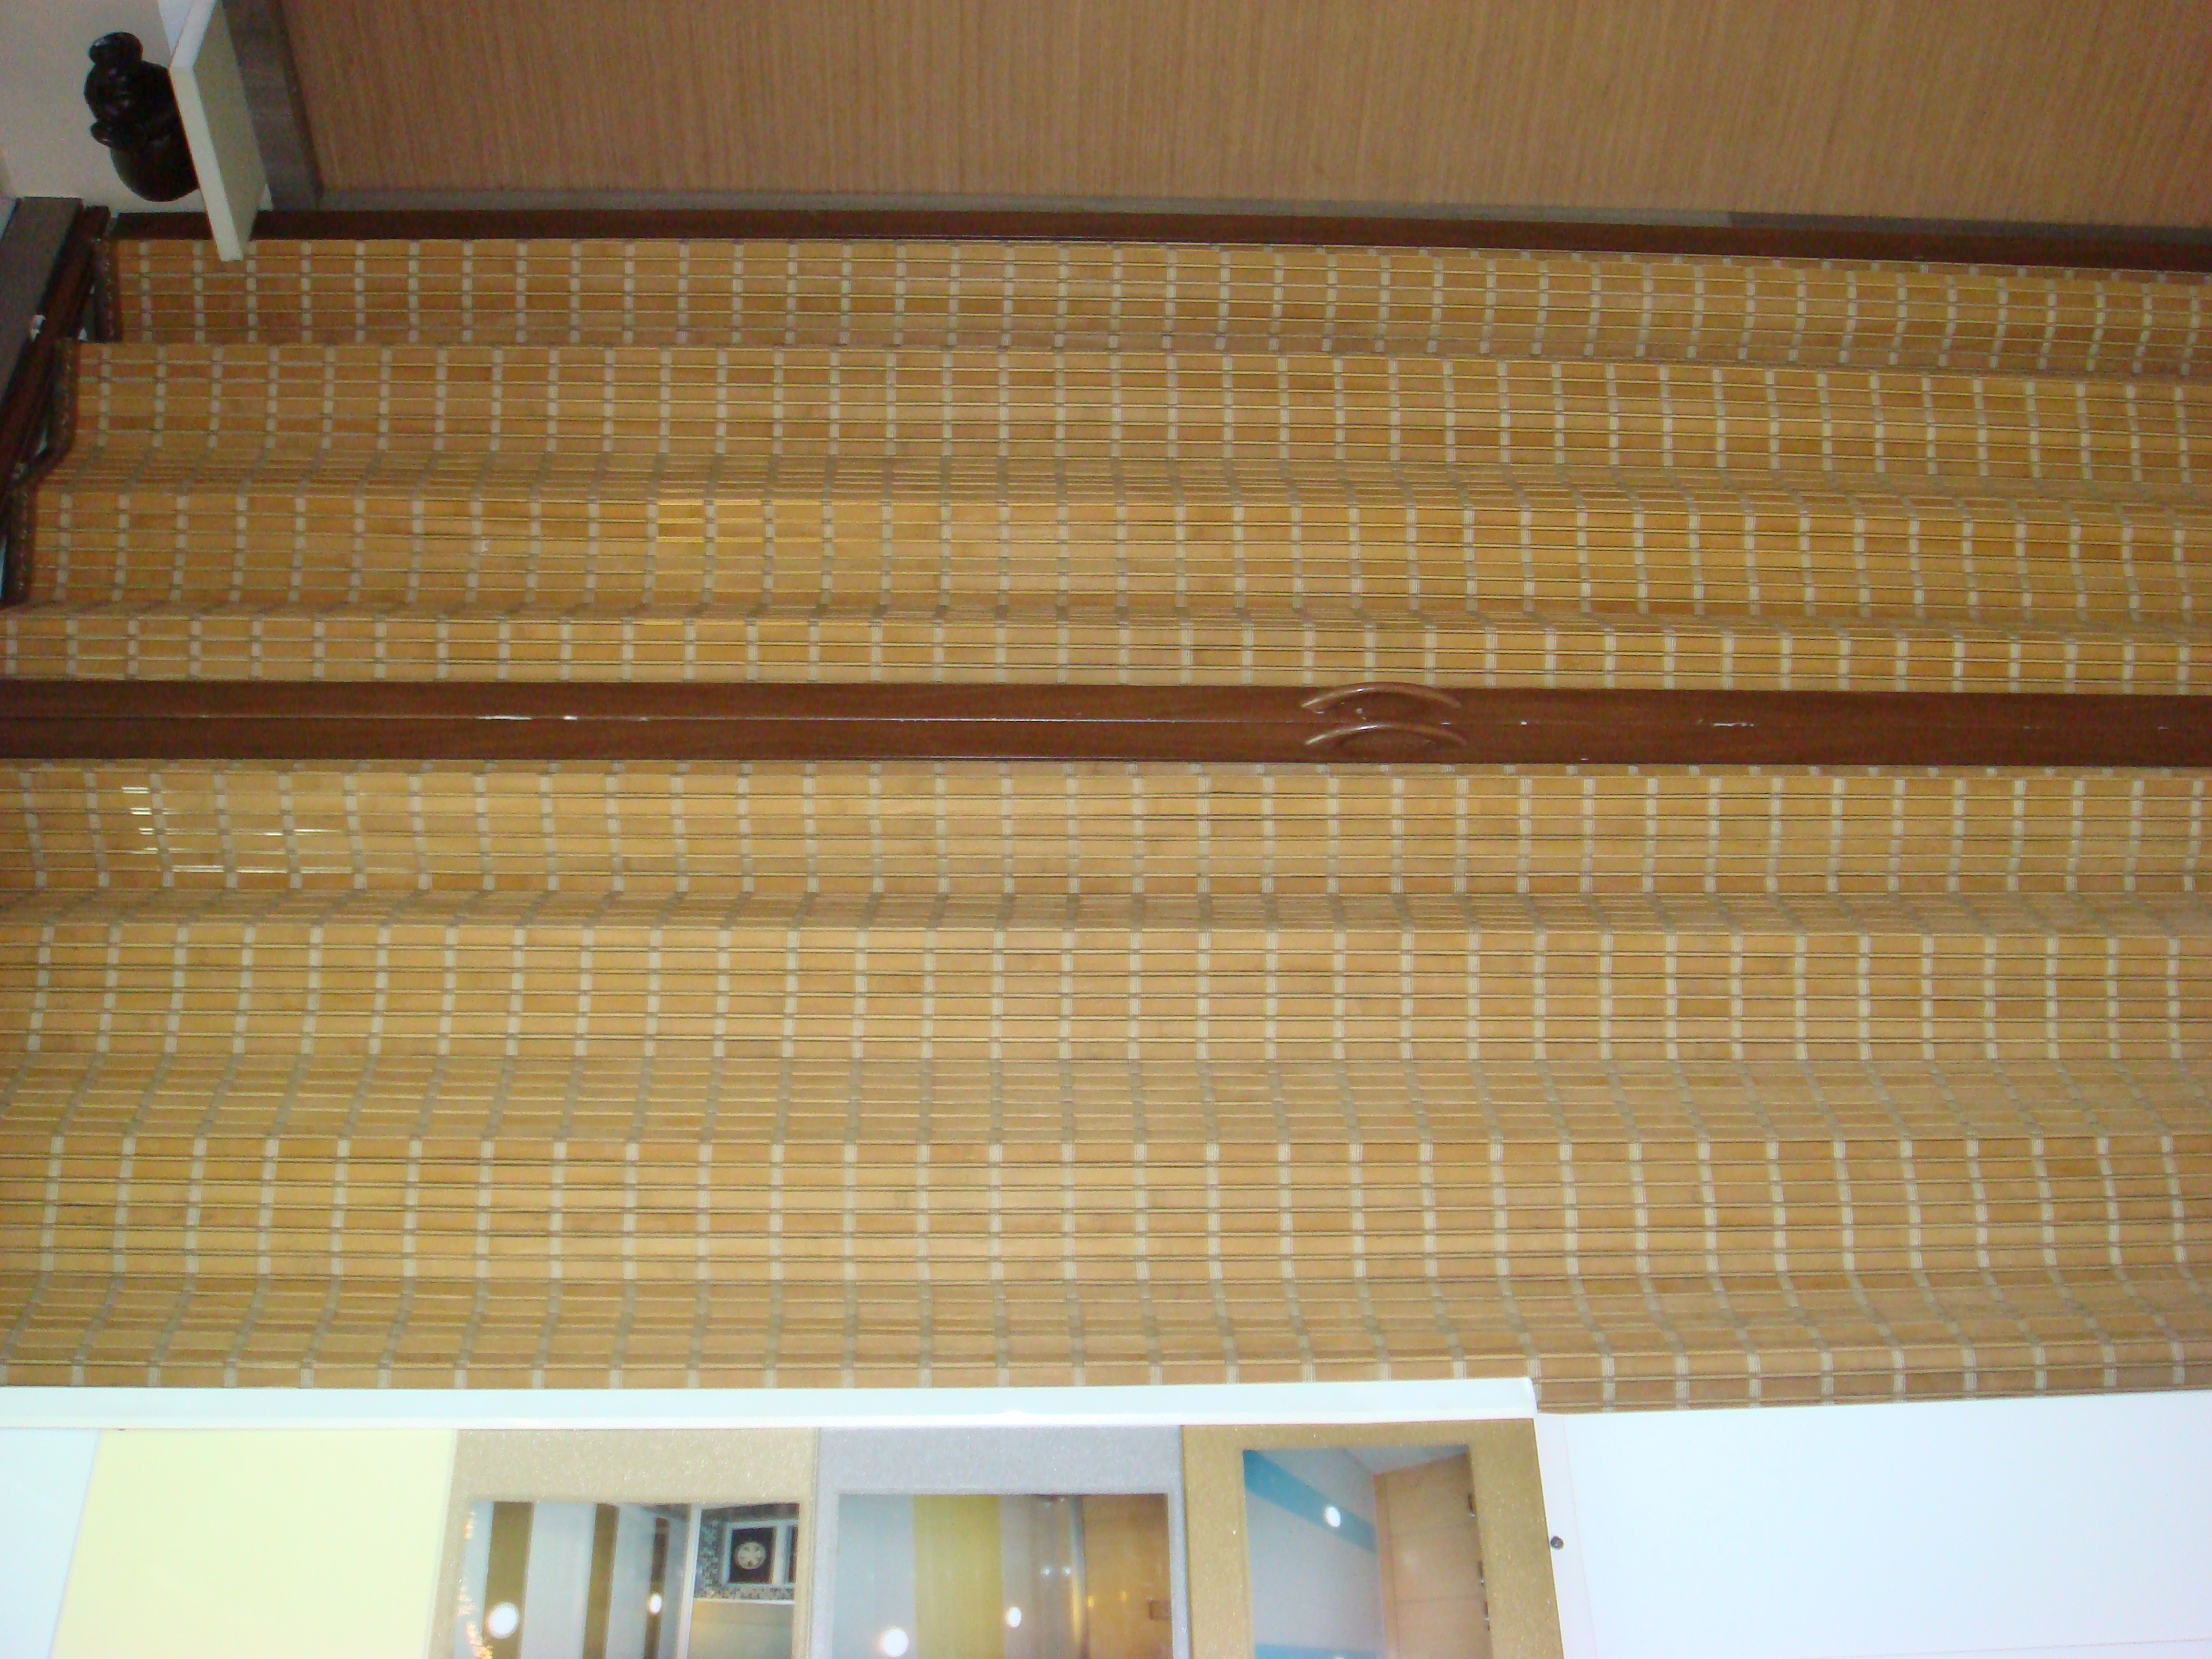 WINDOW PANEL TRACK - WINDOW TREATMENTS - COMPARE PRICES, REVIEWS